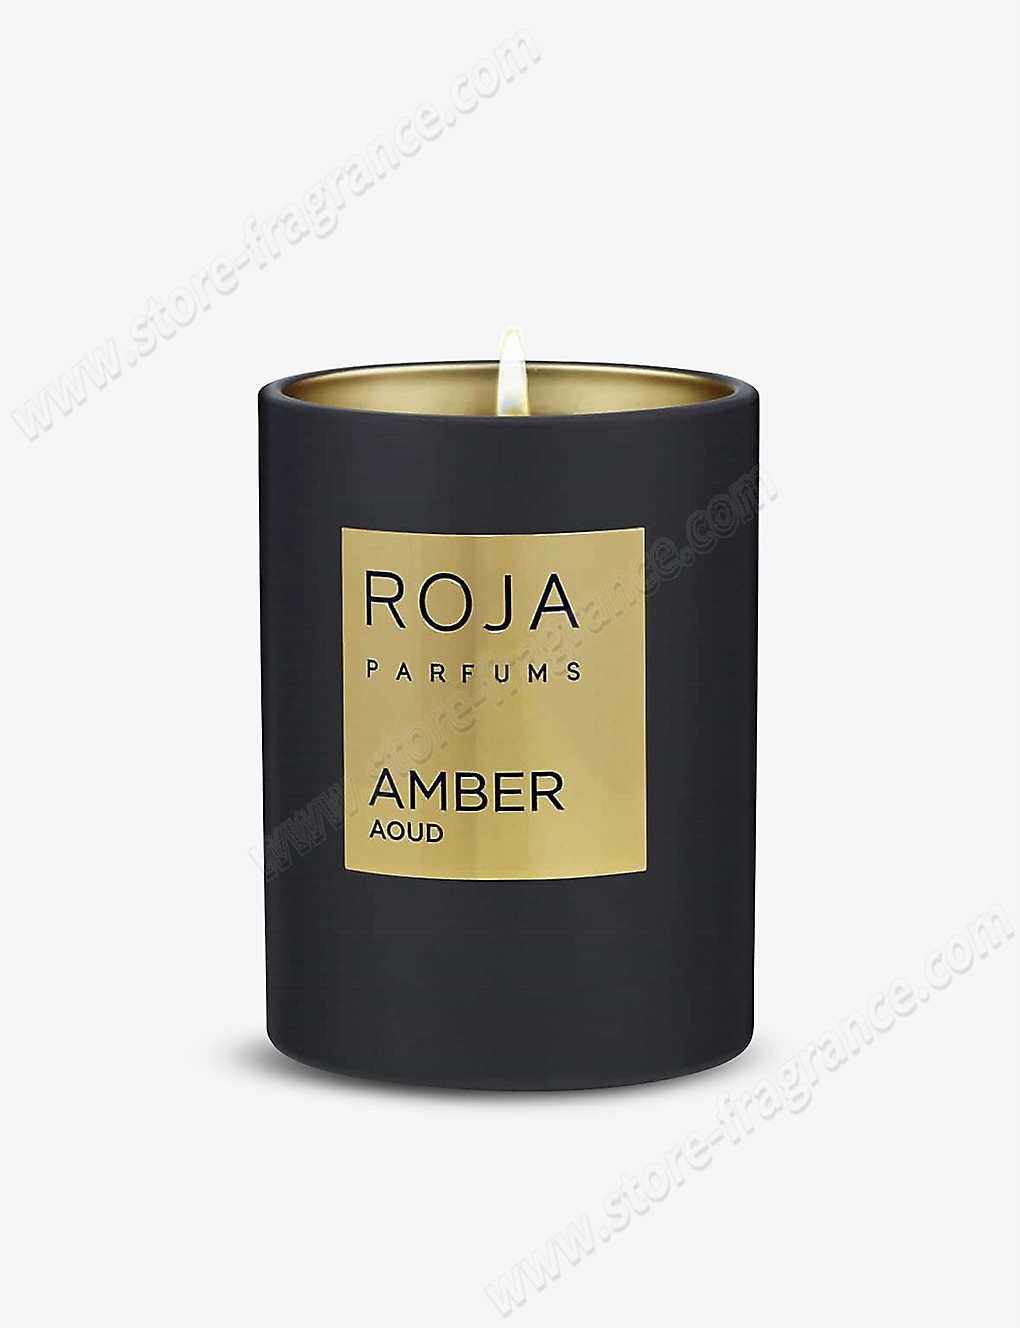 ROJA PARFUMS/Amber Aoud scented candle 300g ✿ Discount Store - ROJA PARFUMS/Amber Aoud scented candle 300g ✿ Discount Store